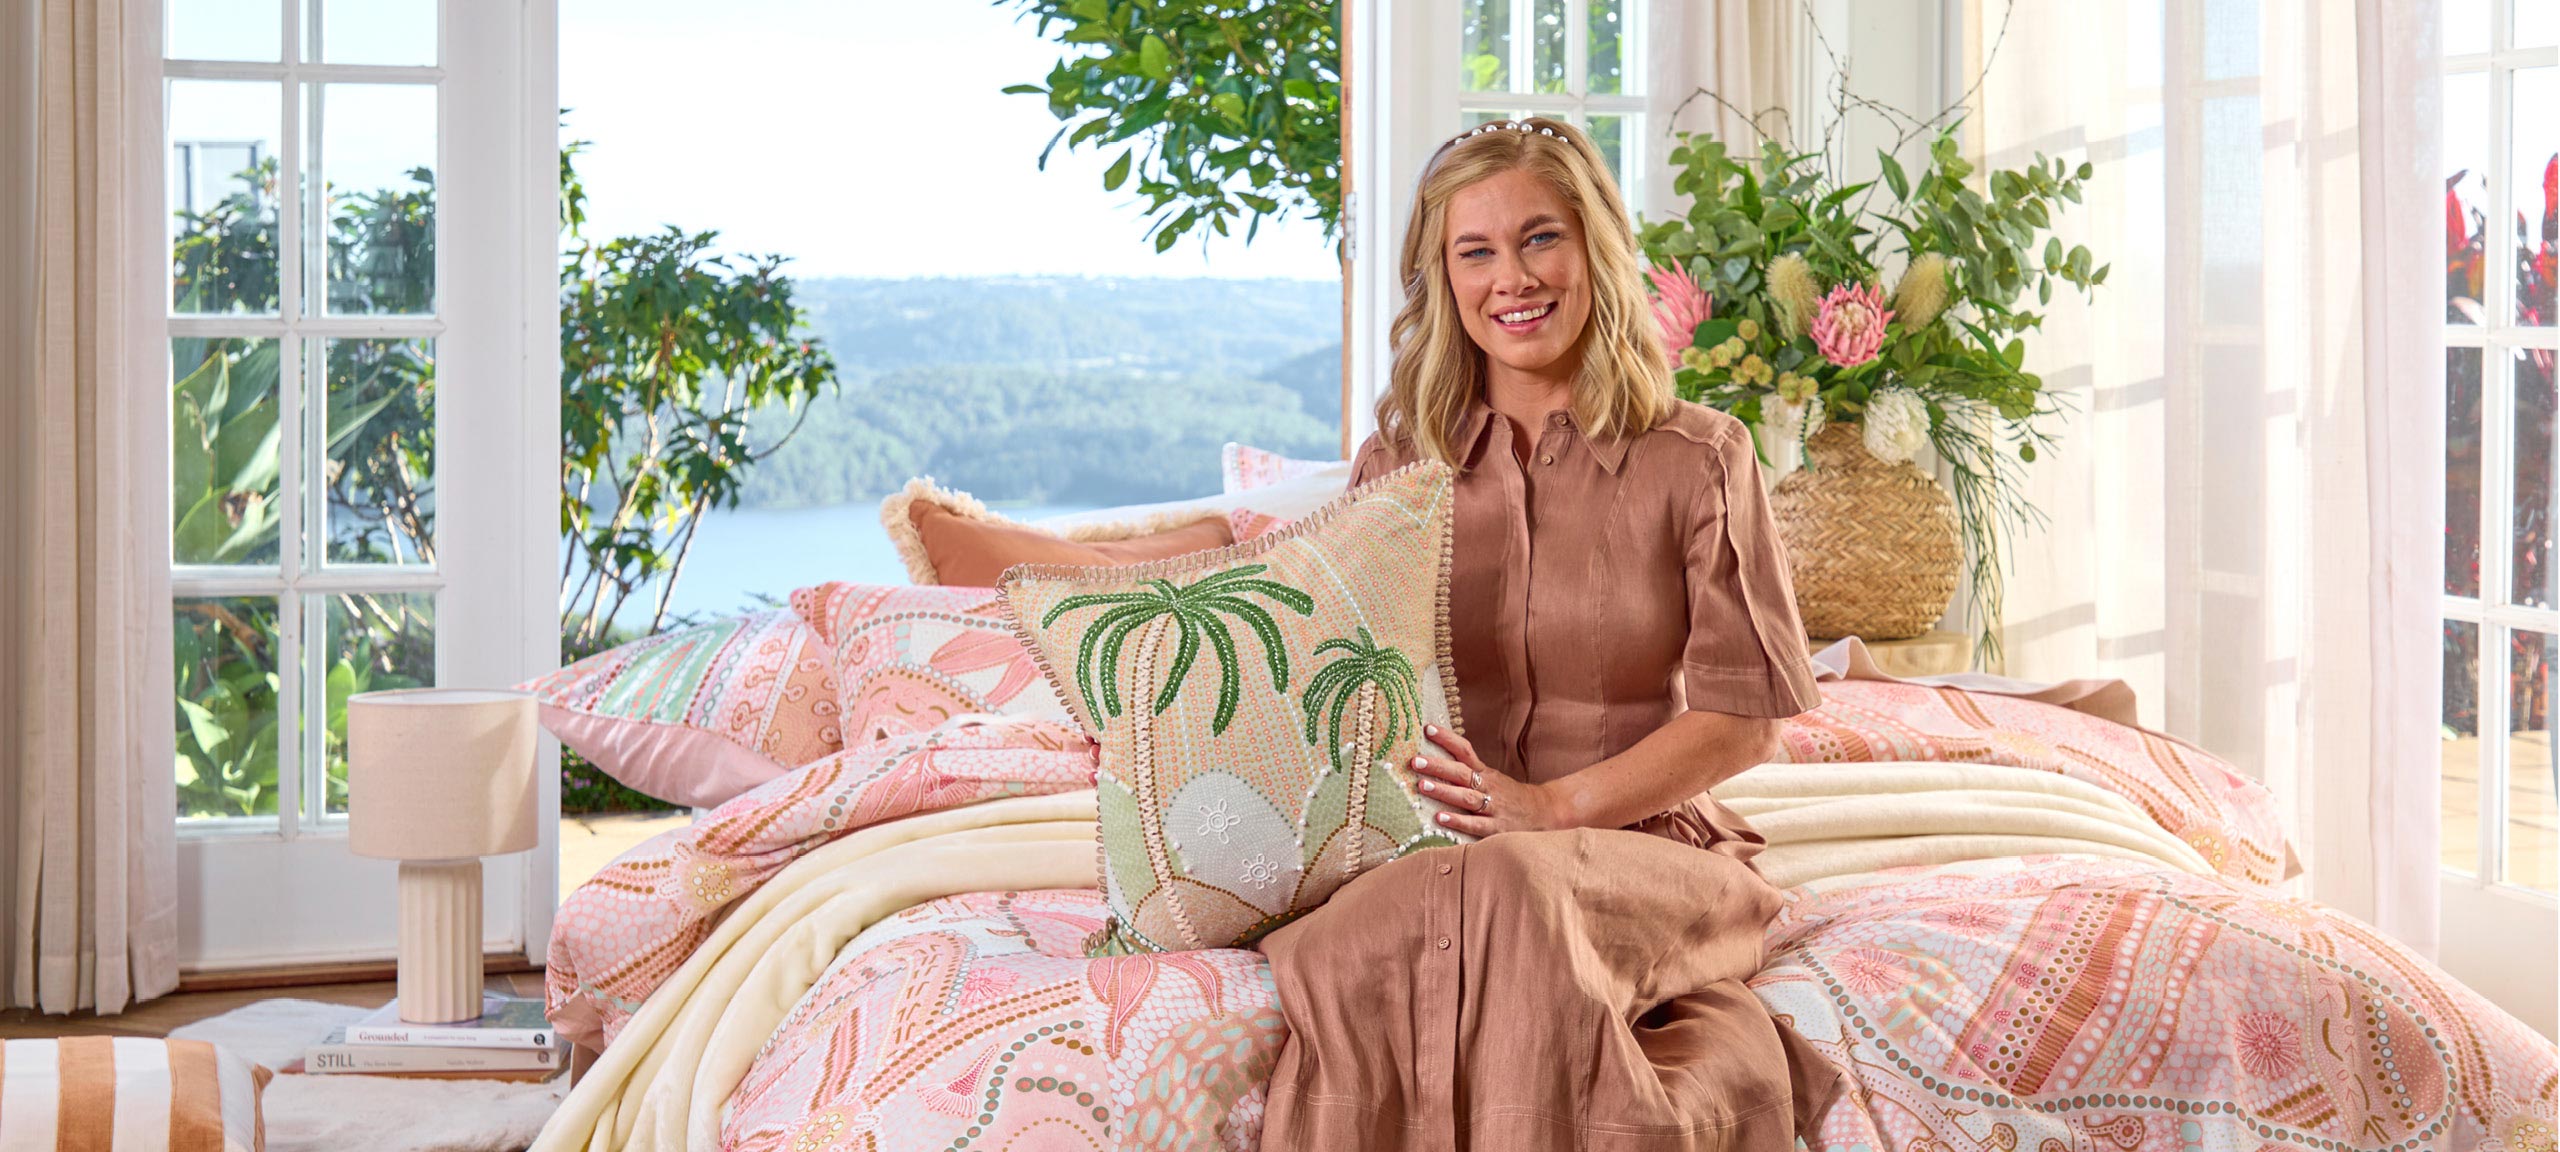 The picture features Domica Hill, a blonde woman, holding a cushion from the Coastal Connections collection that features a palm tree design in an Australian Indigenous art style. Domica is sitting on a bed that features a quilt cover set from the Native Country collection featuring a bright Indigenous Australian design.